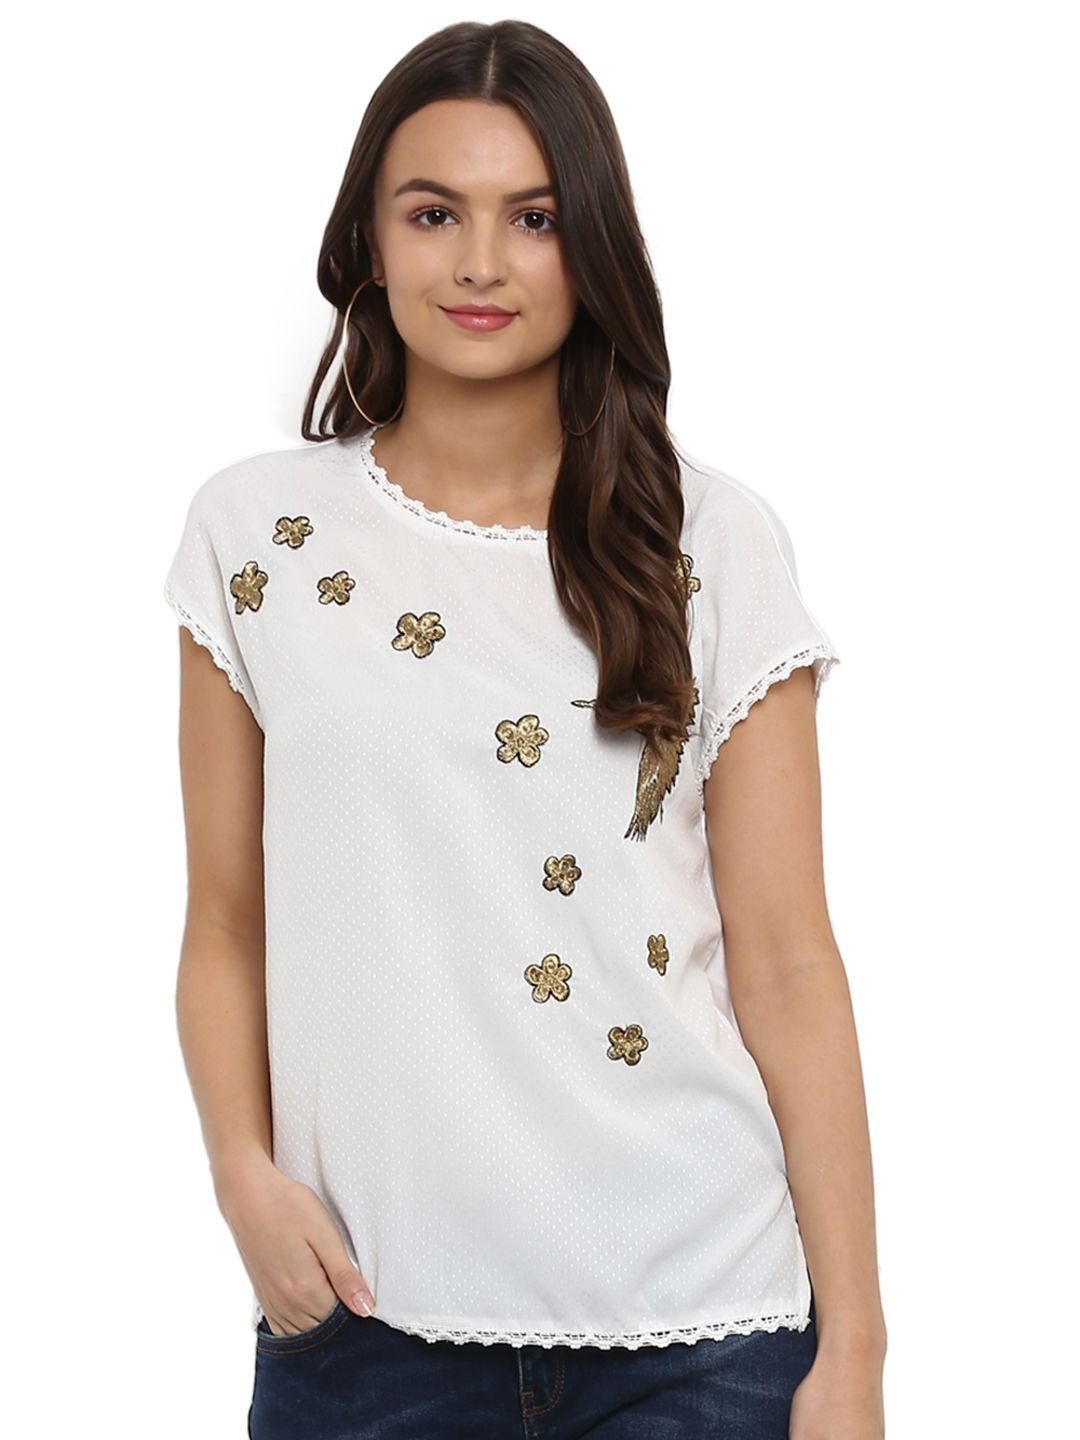 athah women white & gold-toned print extended sleeves top